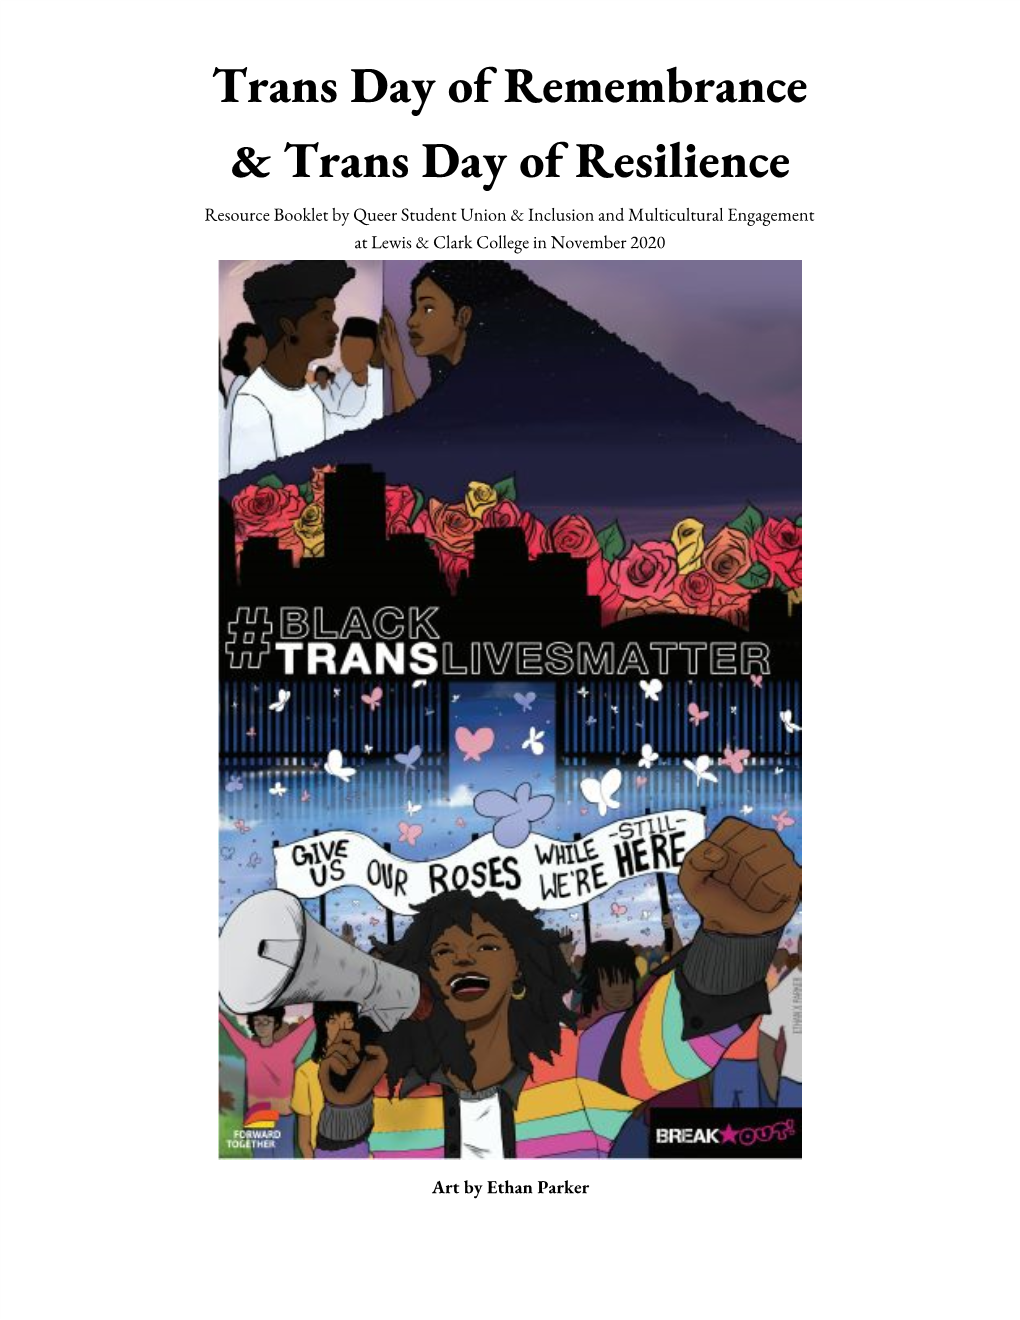 Trans Day of Remembrance & Trans Day of Resilience